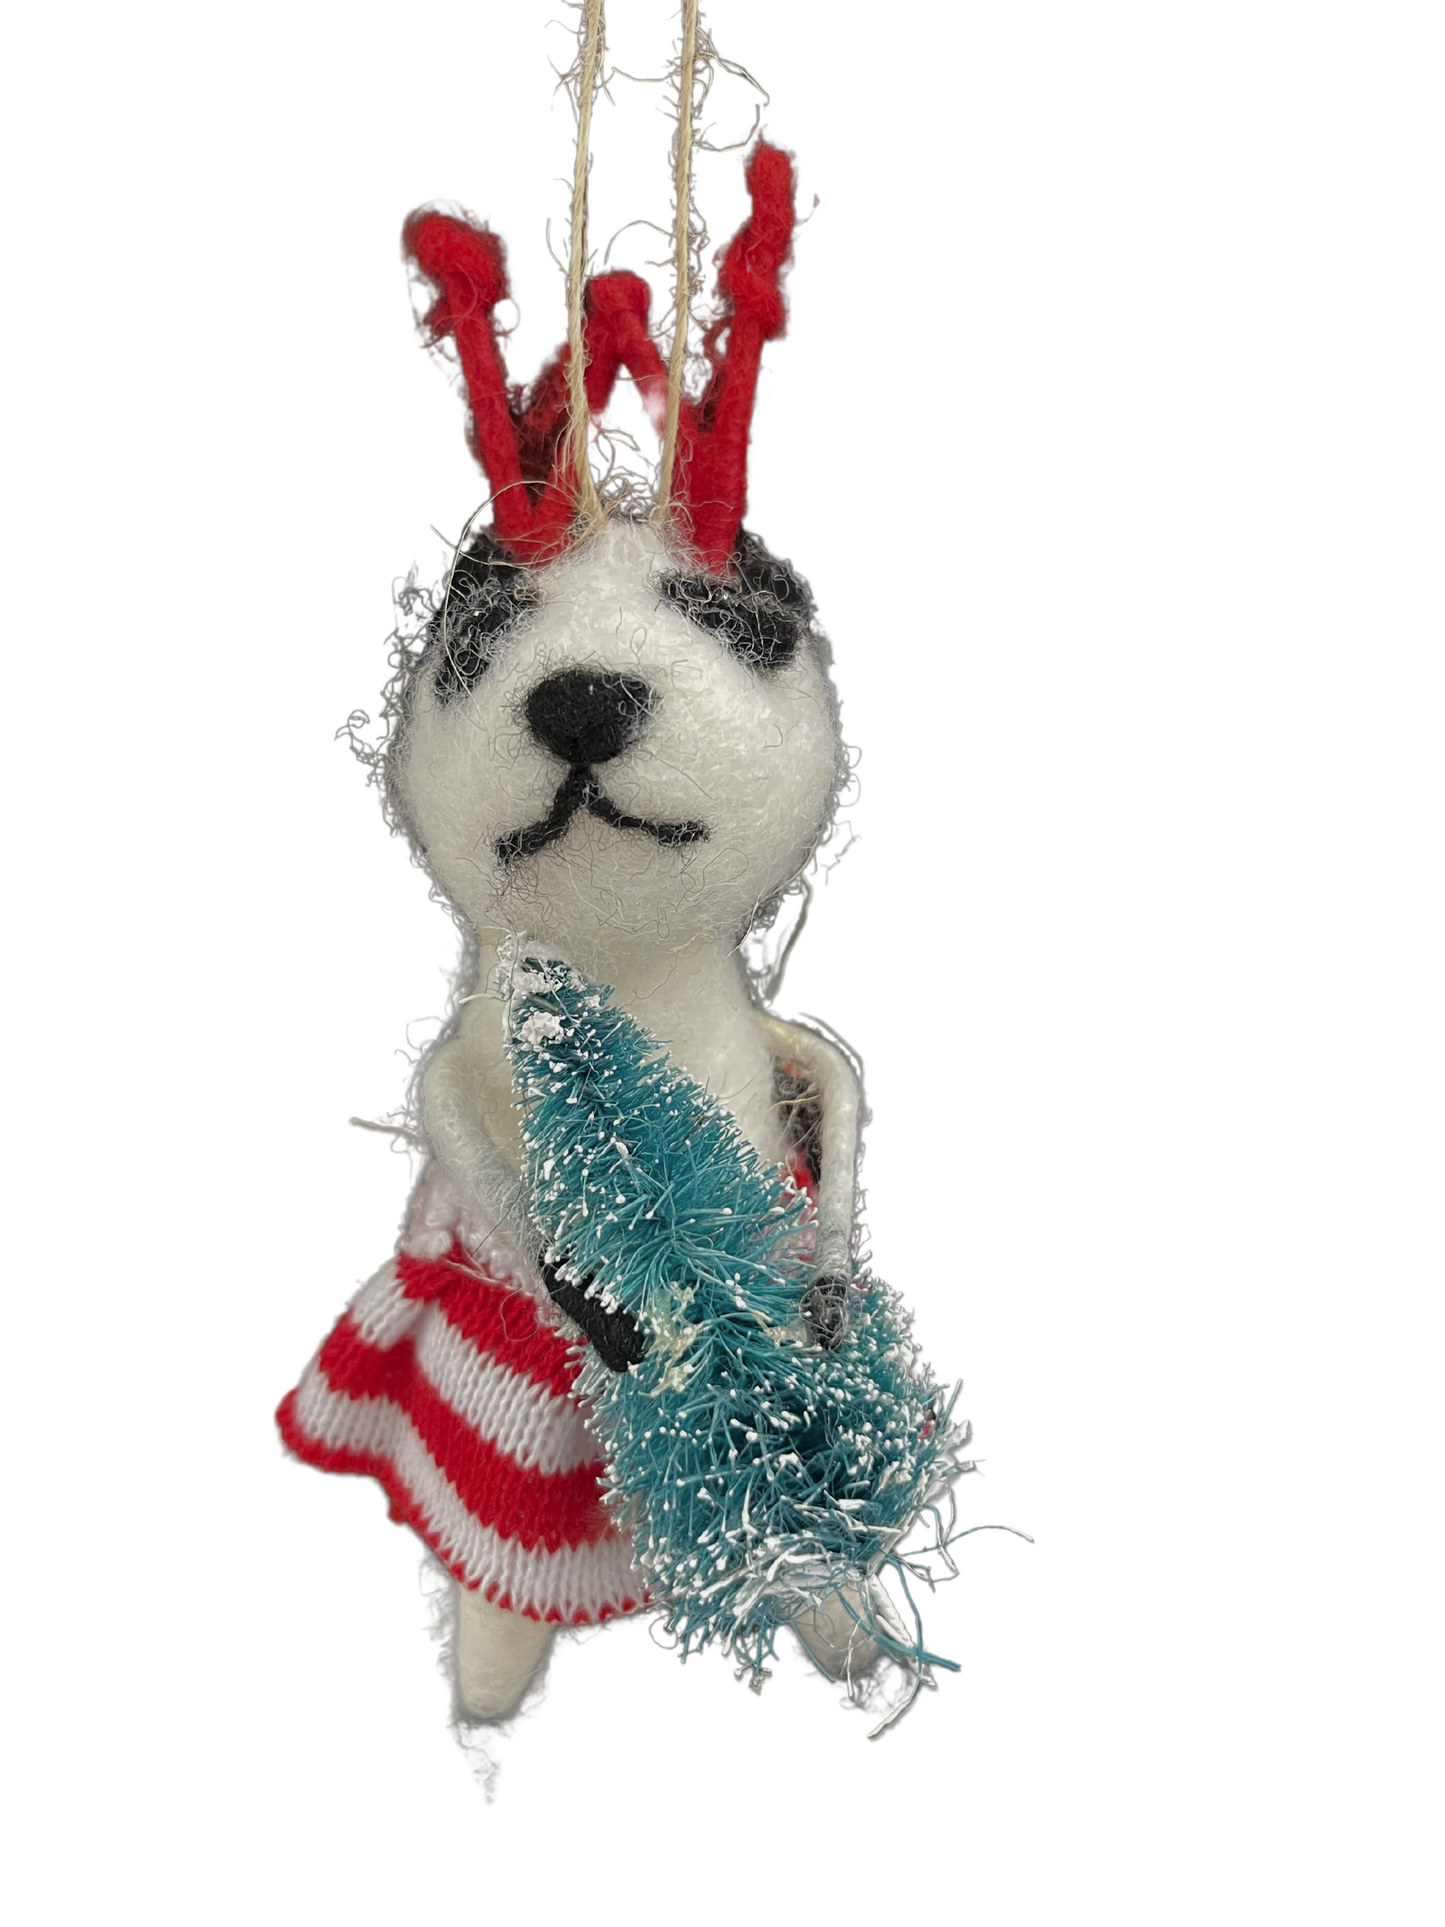 Felt Panda In Striped Clothes Wooly Antlers Ornament